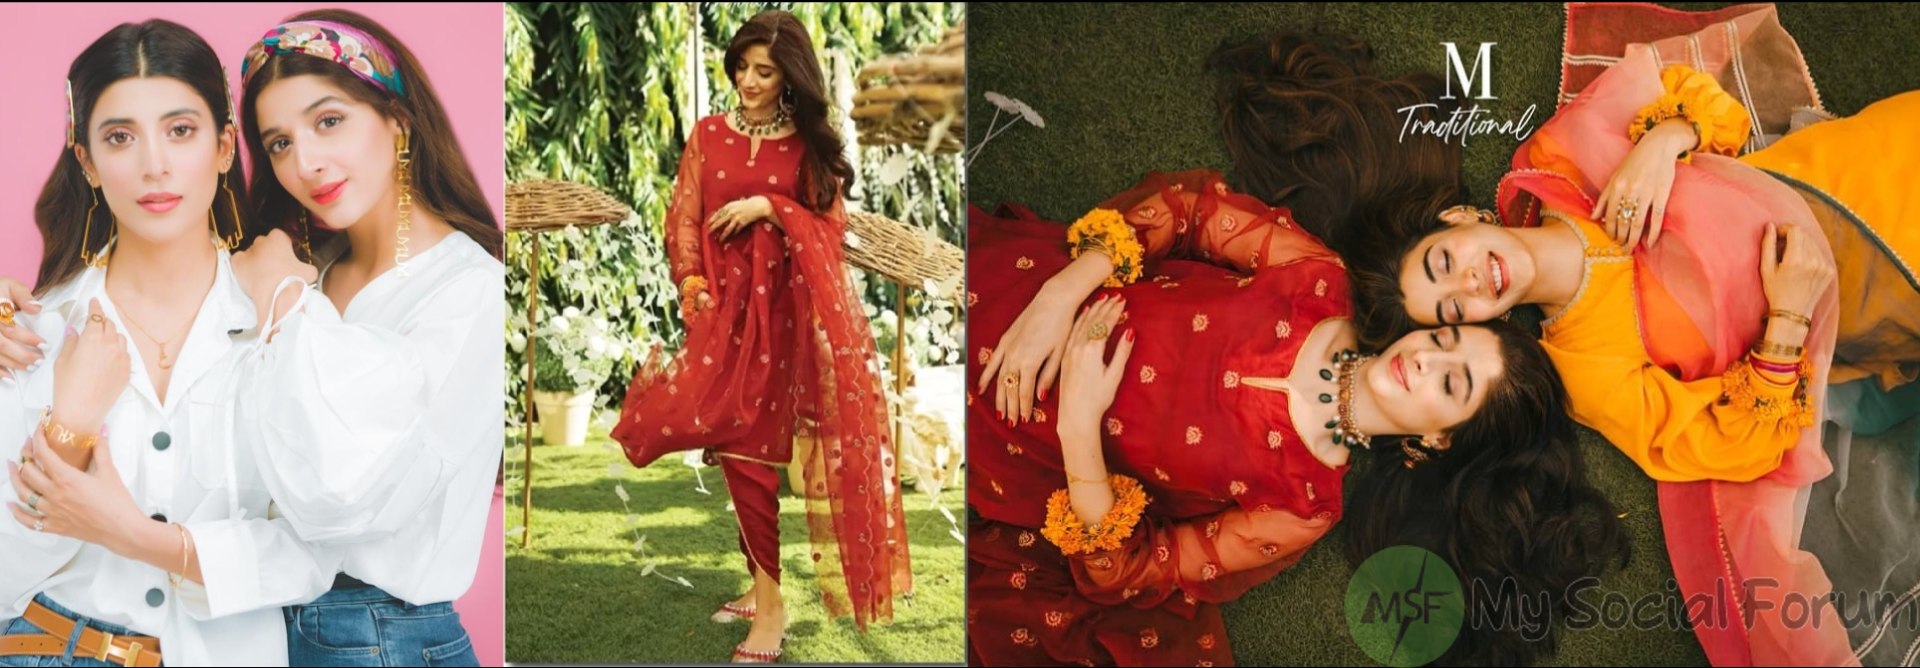 Lovely Pictures Of Mawra Hocane And Urwa Hocane On Launching Their Brand Uxm